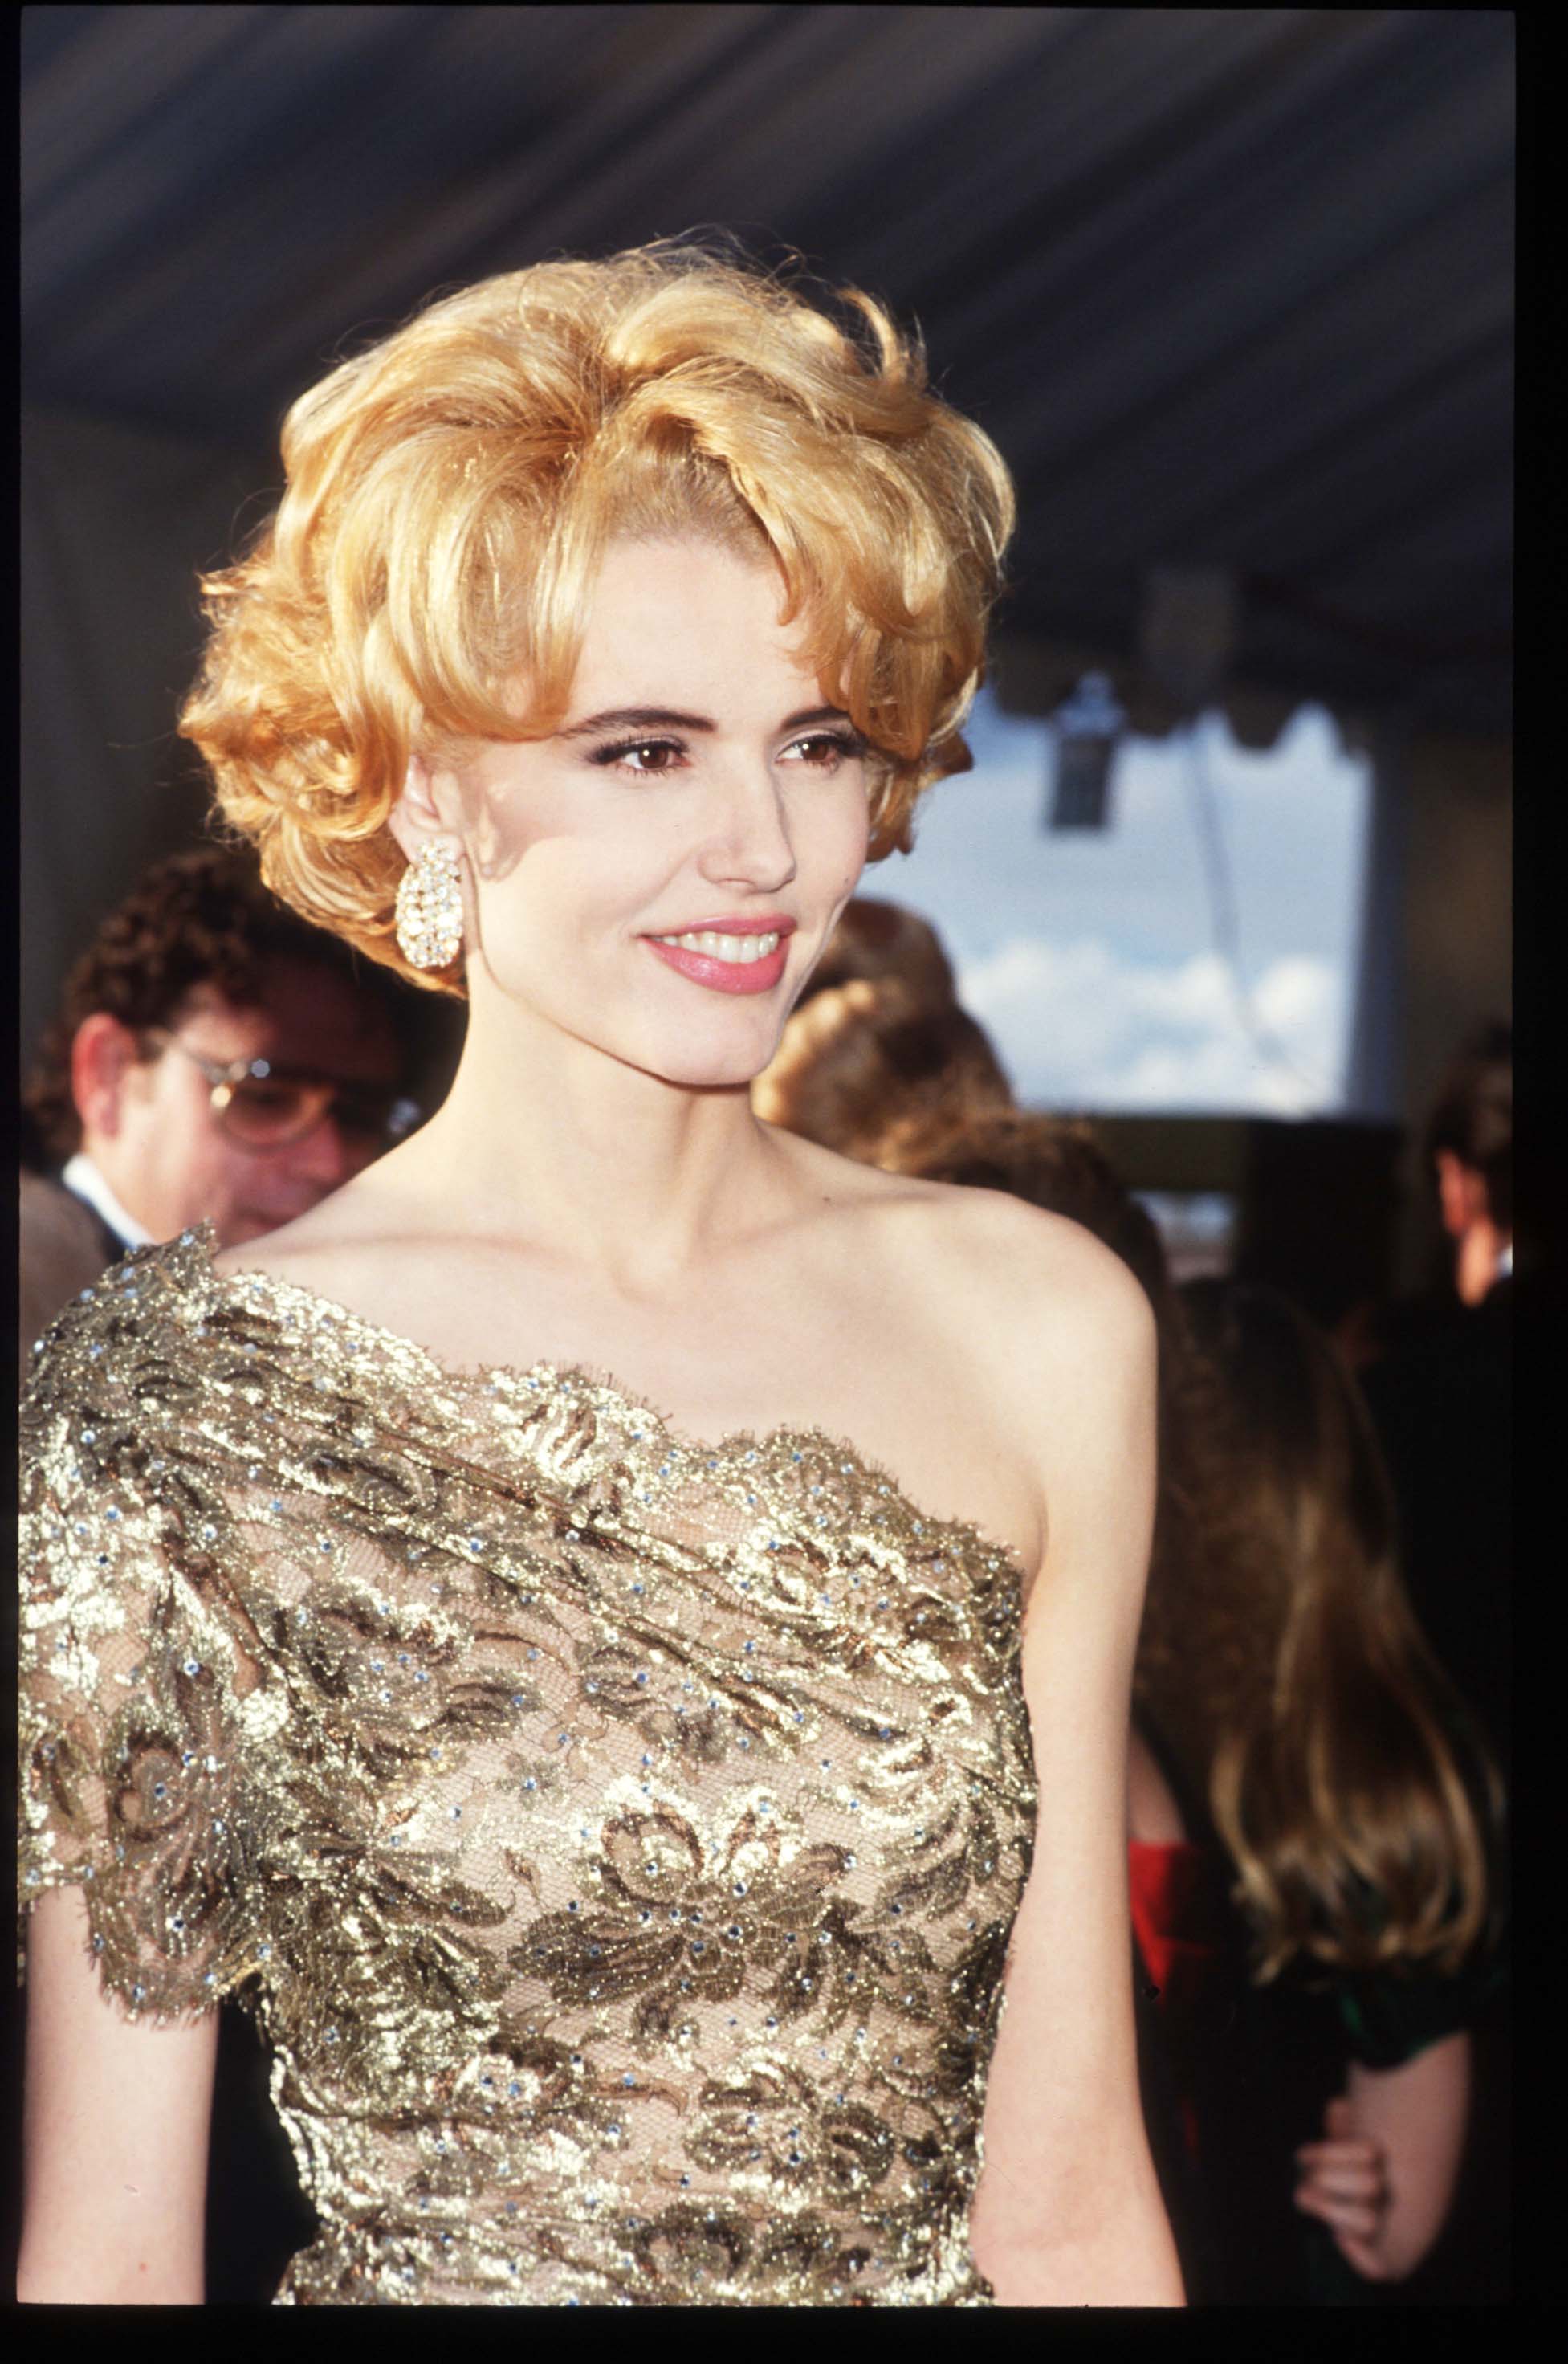 Geena Davis at the Oscars on March 25, 1991 | Source: Getty Images